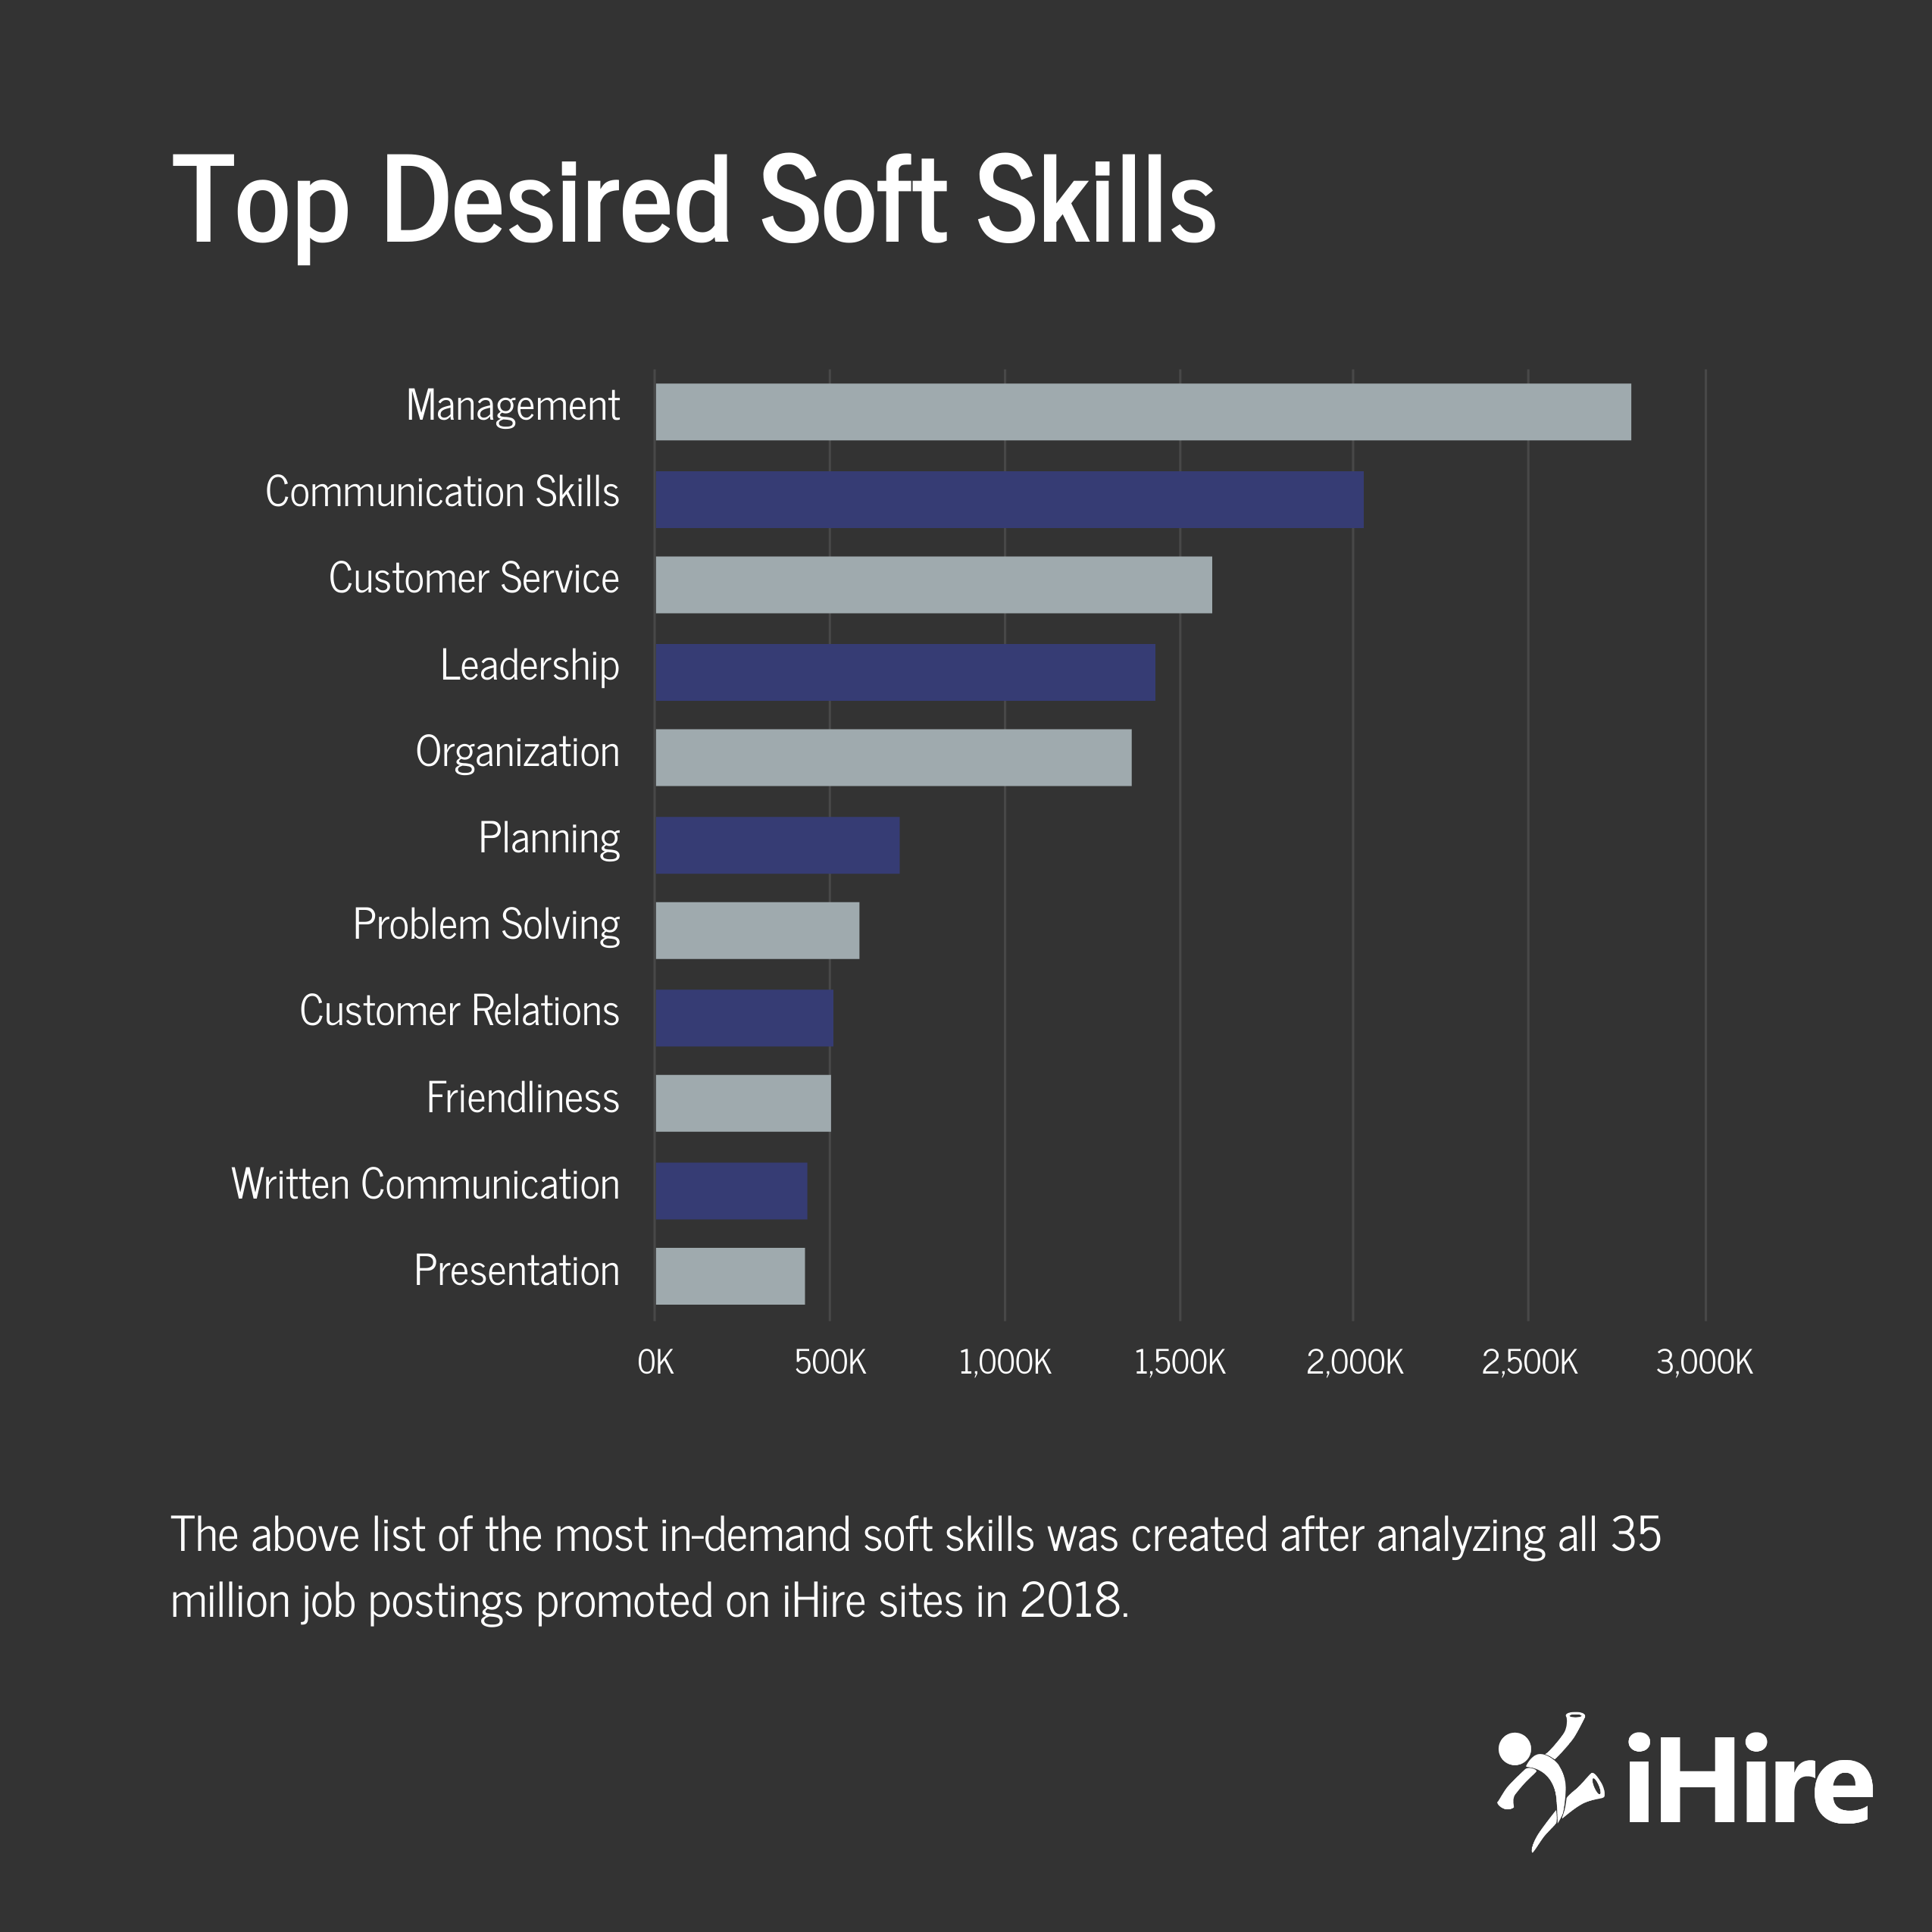 Chart showing the most in-demand soft skills for resume writing